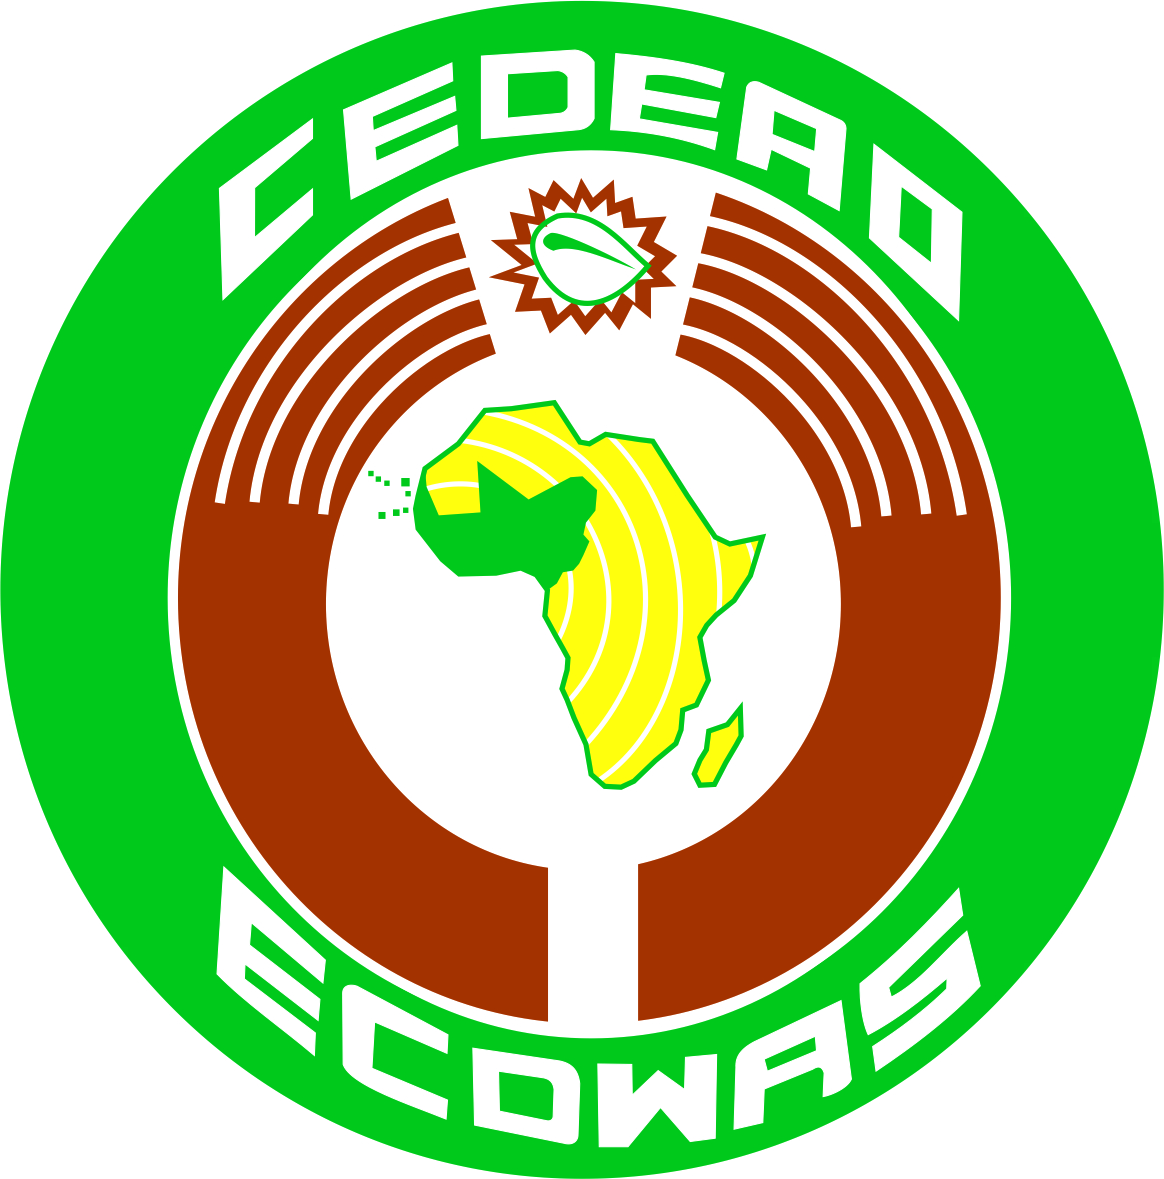 Joint Meeting of Economic Community of West African States (ECOWAS) Experts and Joint Ministers in Charge of Mining and Hydrocarbons to Hold in Dakar